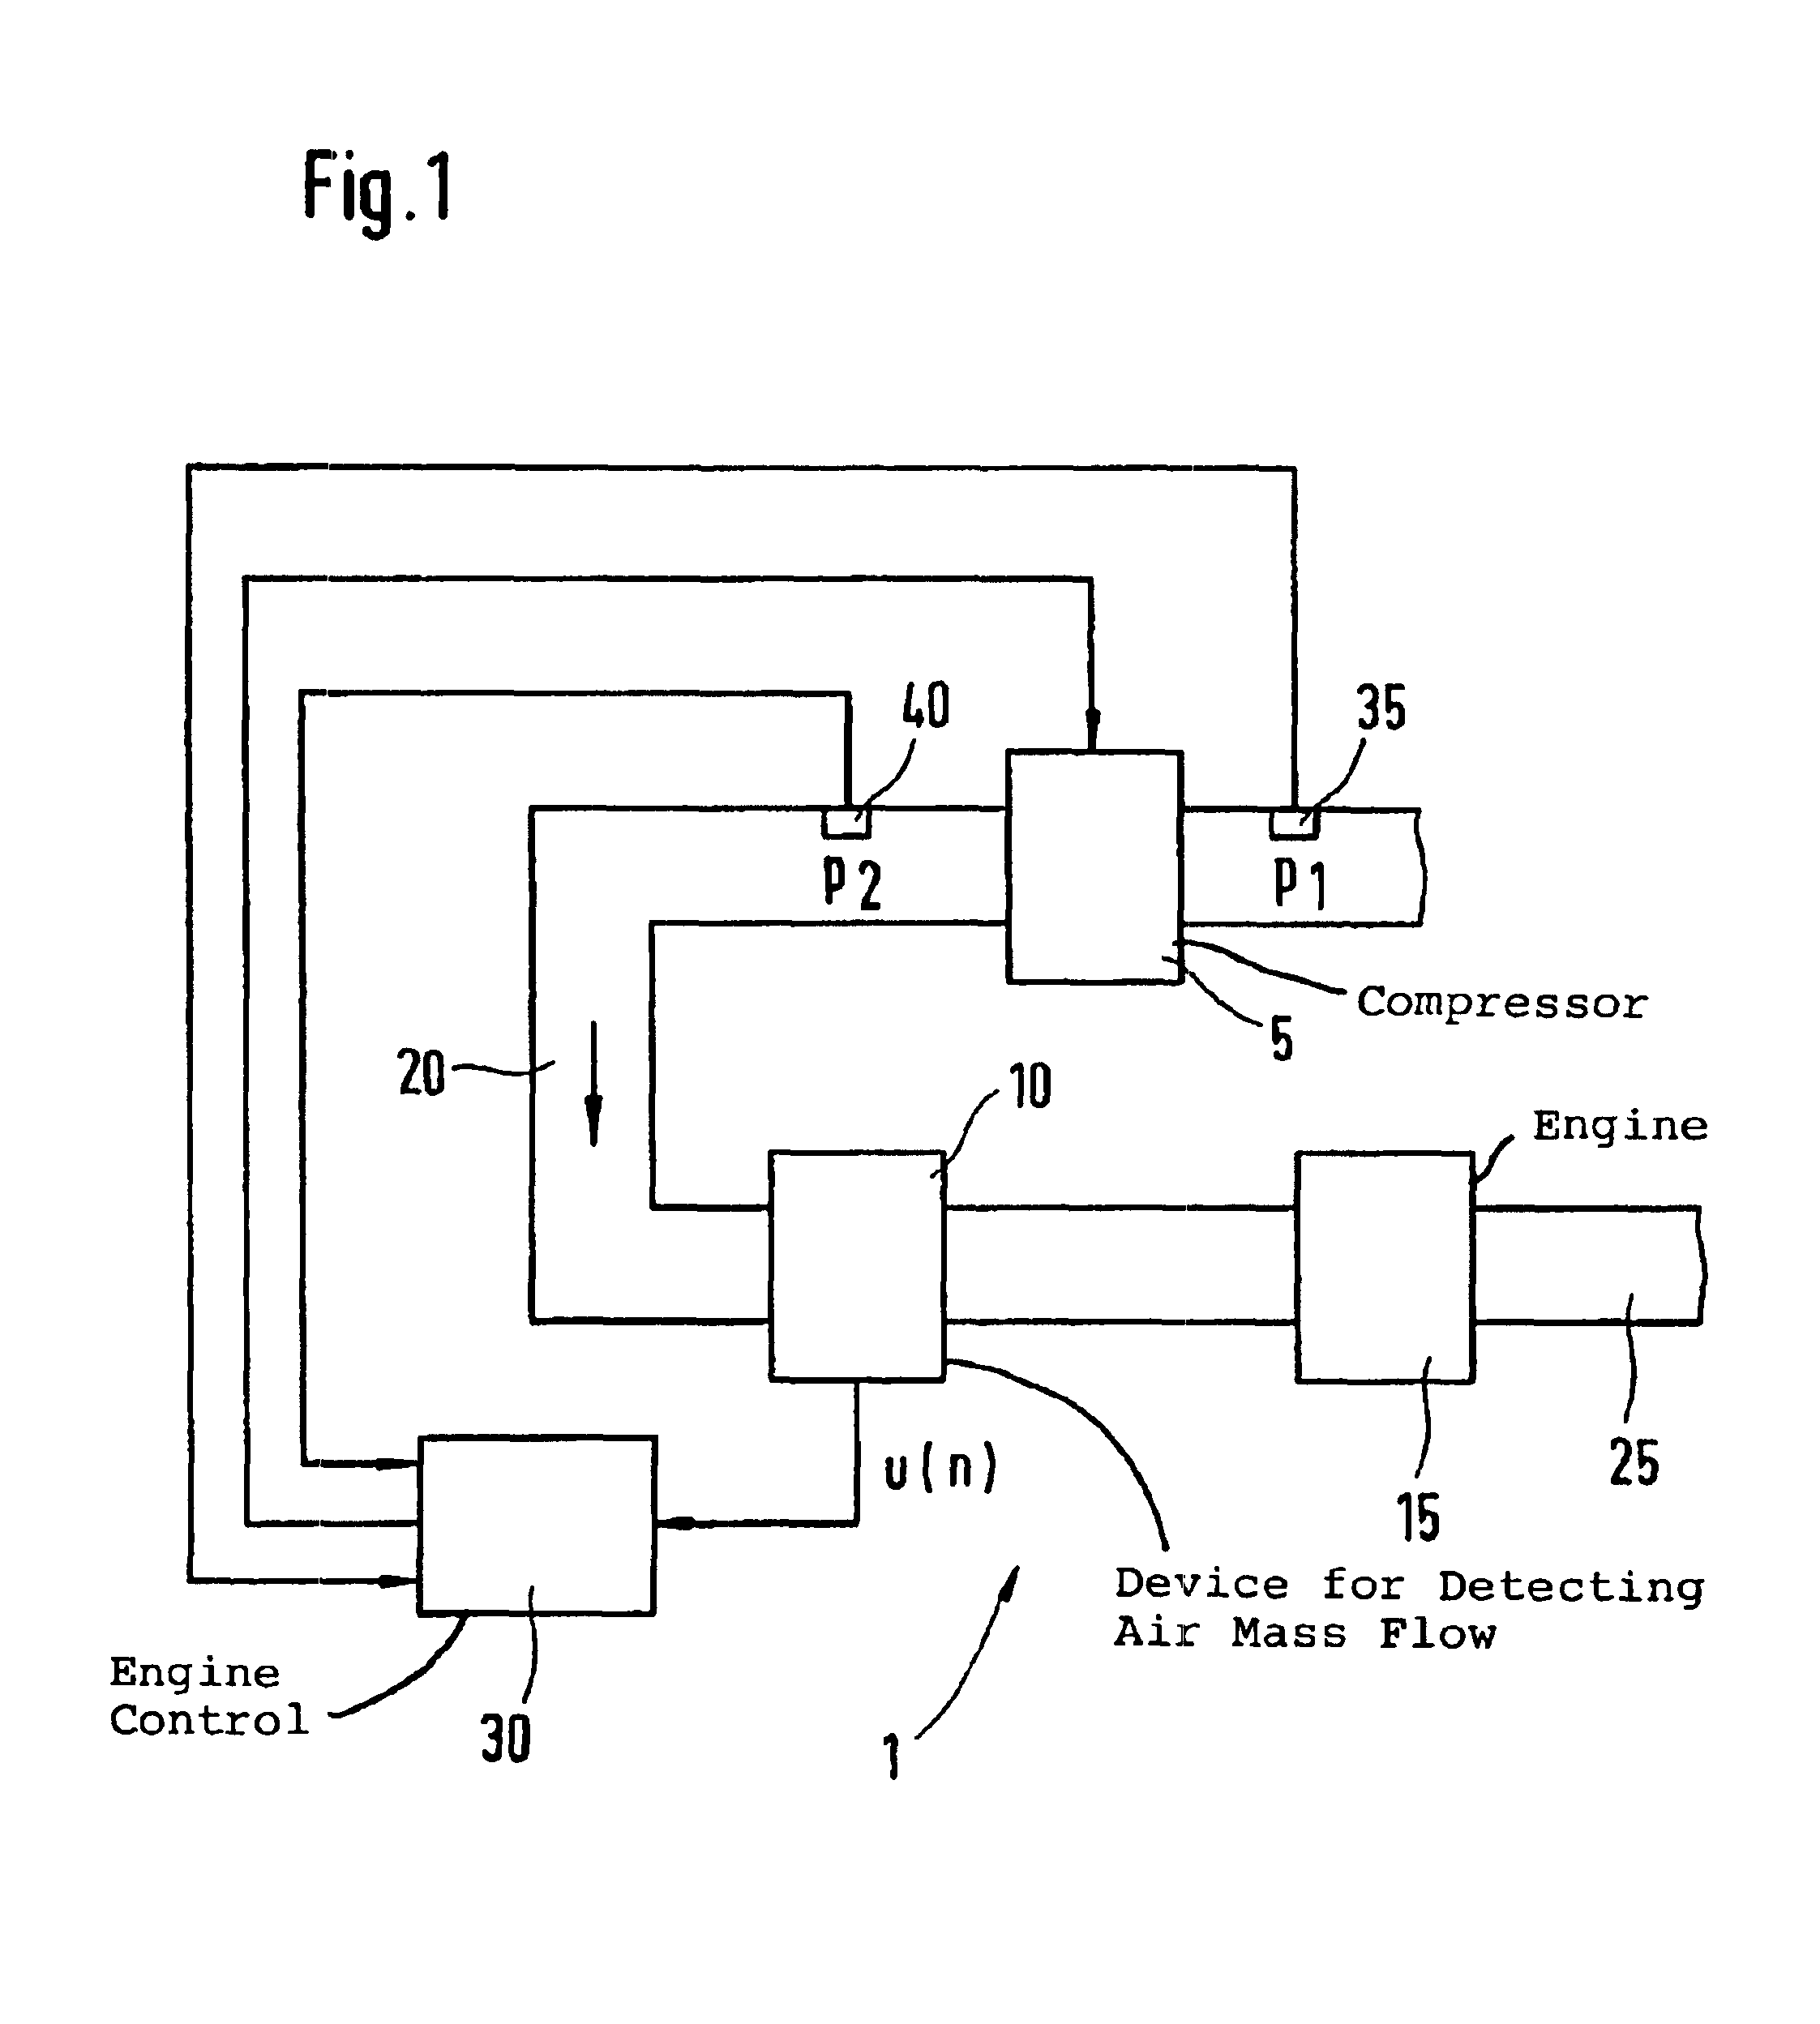 Method for operating an internal combustion engine having a compressor